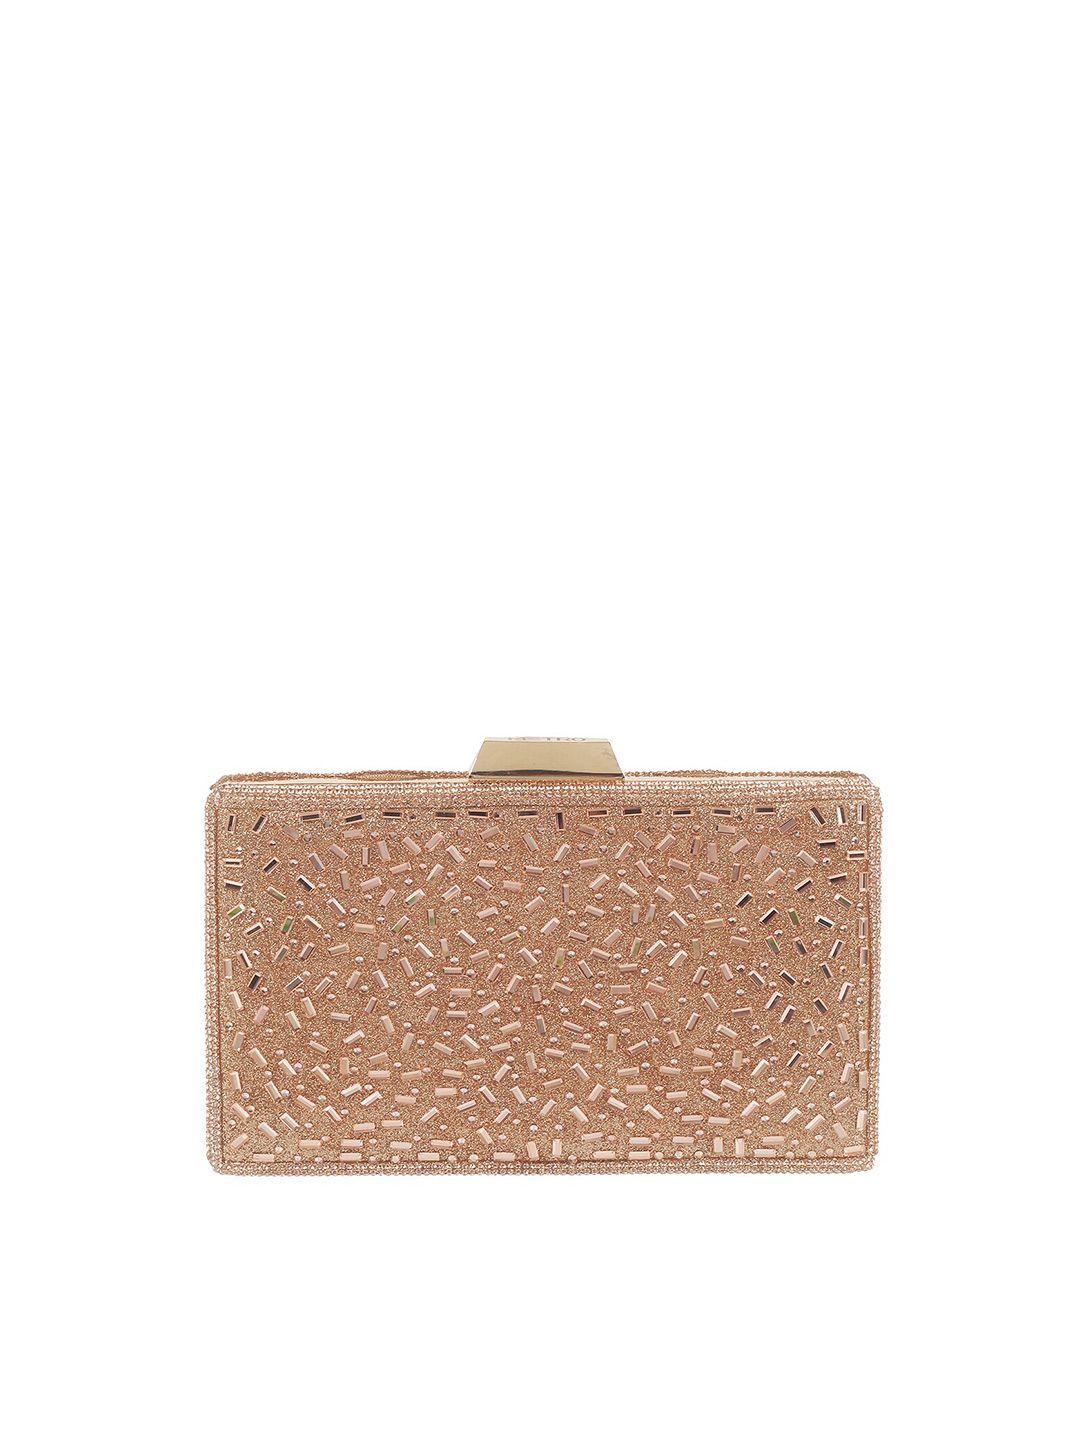 metro textured embellished purse clutch